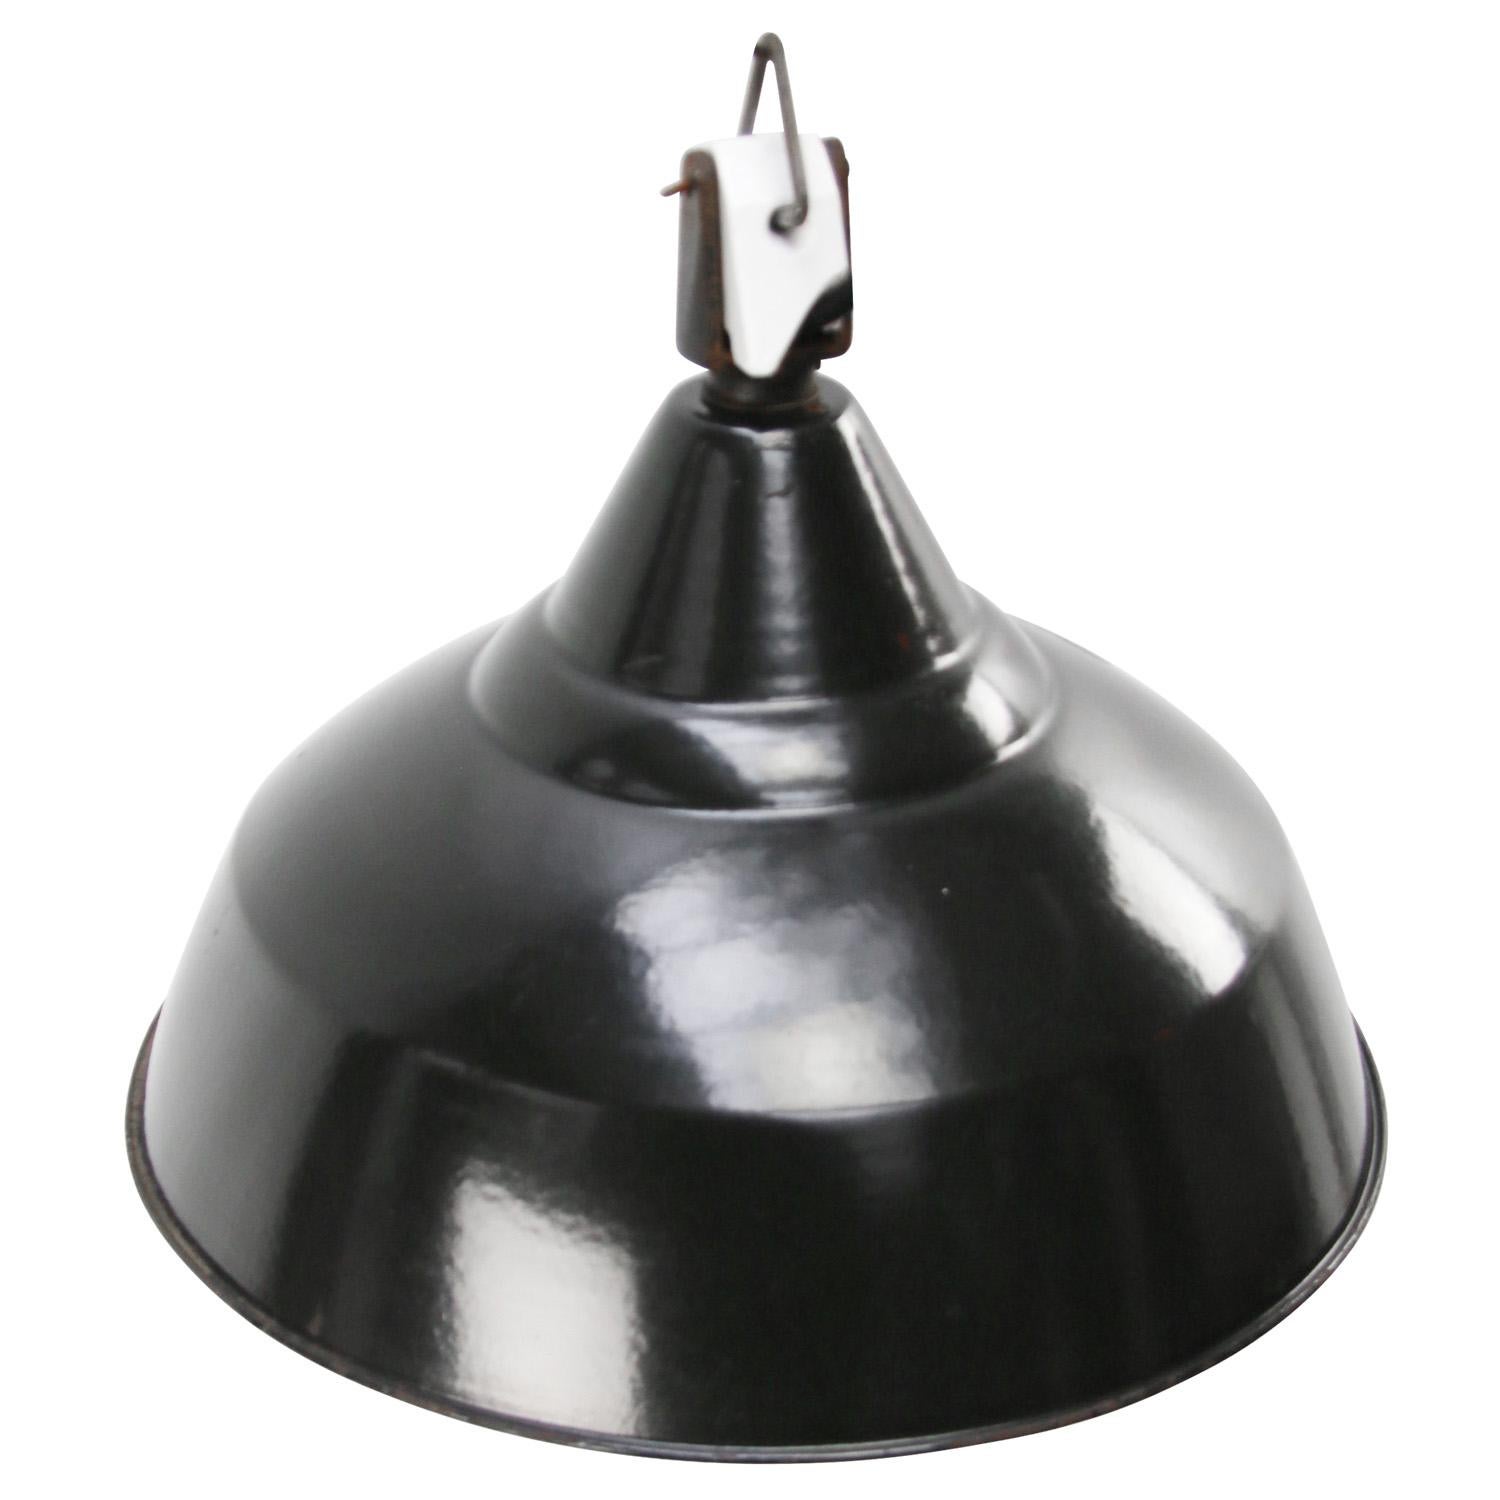 French black Industrial pendant lamp.
Porcelain top.

Used in warehouses and factories in France and Belgium. 

Weight: 1.40 kg / 3.1 lb

Priced per individual item. All lamps have been made suitable by international standards for